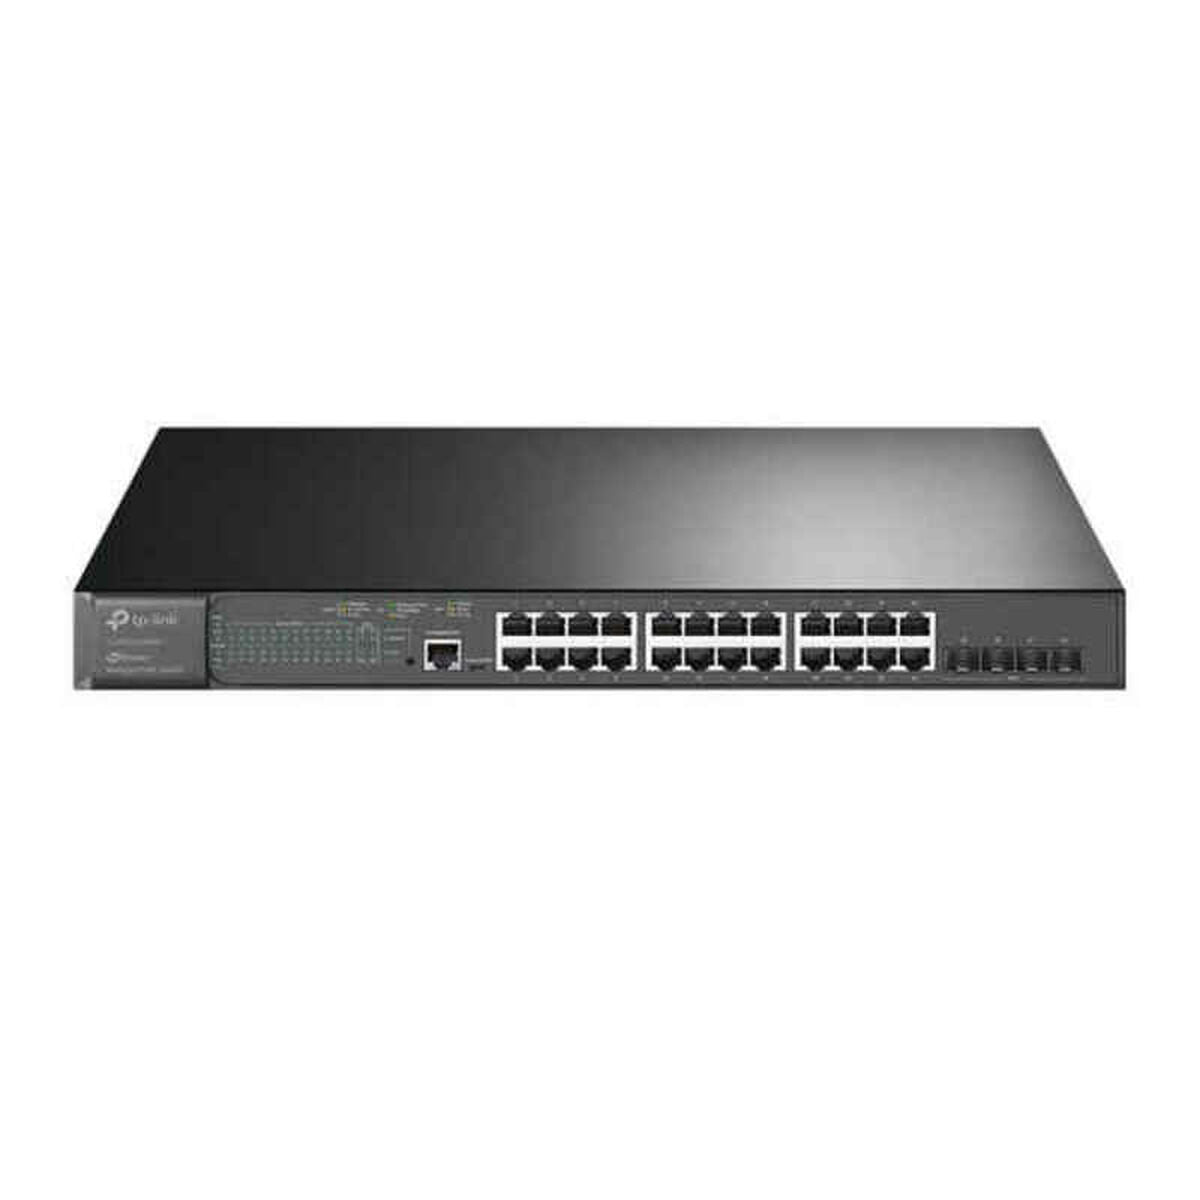 Switch TP-Link TL-SG3428XMP, TP-Link, Computing, Network devices, switch-tp-link-tl-sg3428xmp-1, Brand_TP-Link, category-reference-2609, category-reference-2803, category-reference-2827, category-reference-t-19685, category-reference-t-19914, Condition_NEW, networks/wiring, Price_500 - 600, Teleworking, RiotNook